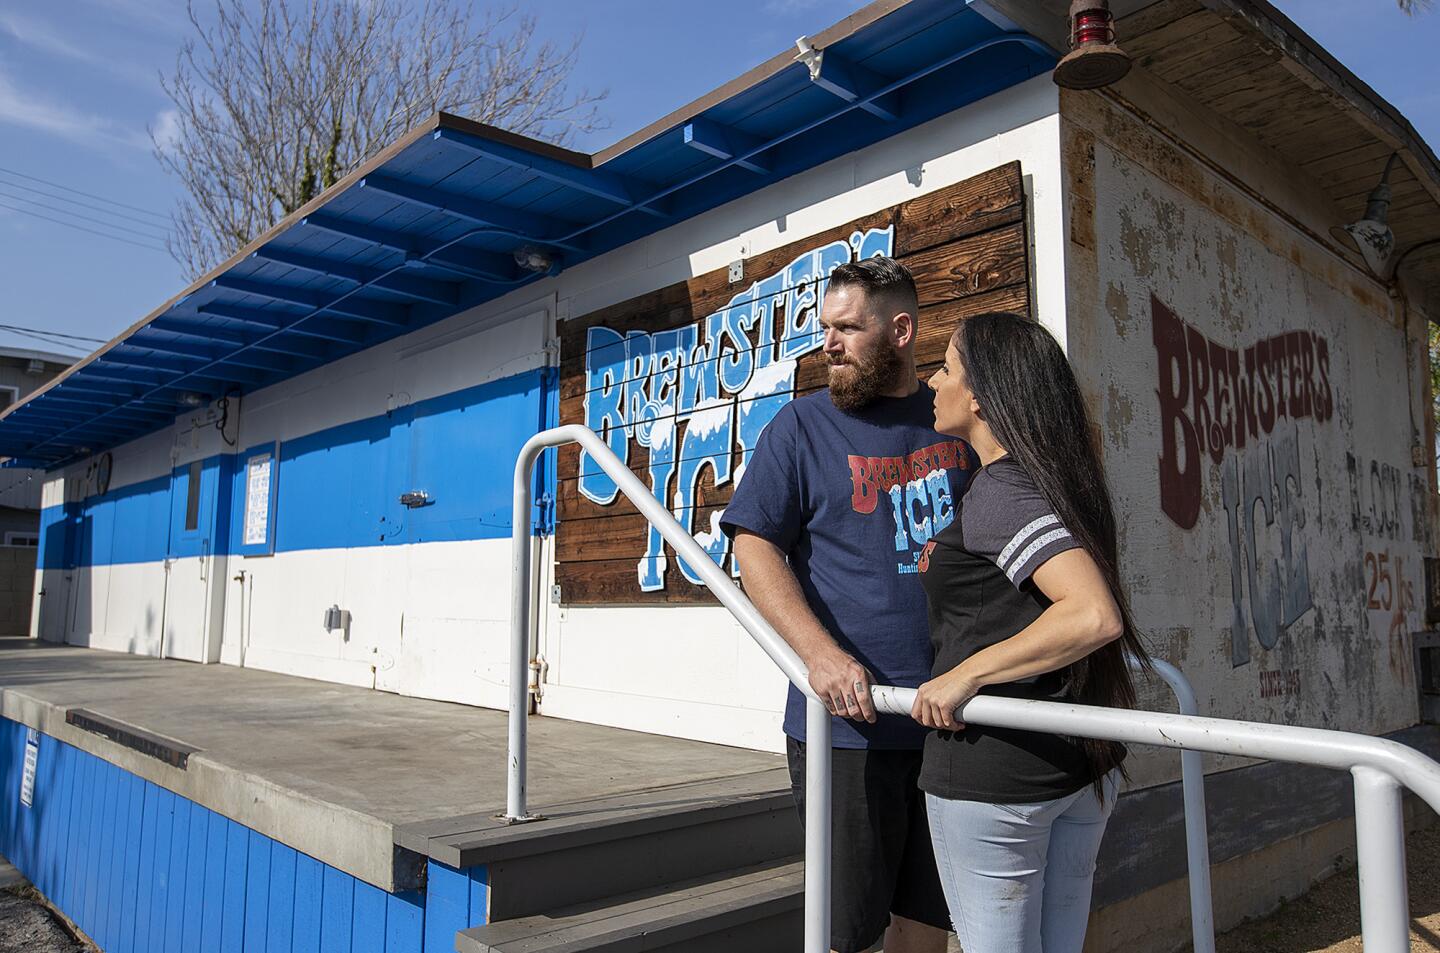 Ryan and Yvette Pape purchased and refurbished Brewster’s Ice in downtown Huntington Beach. They live in Bellflower but have been so well received since they purchased the business that they are looking for a house in or near Huntingtin.